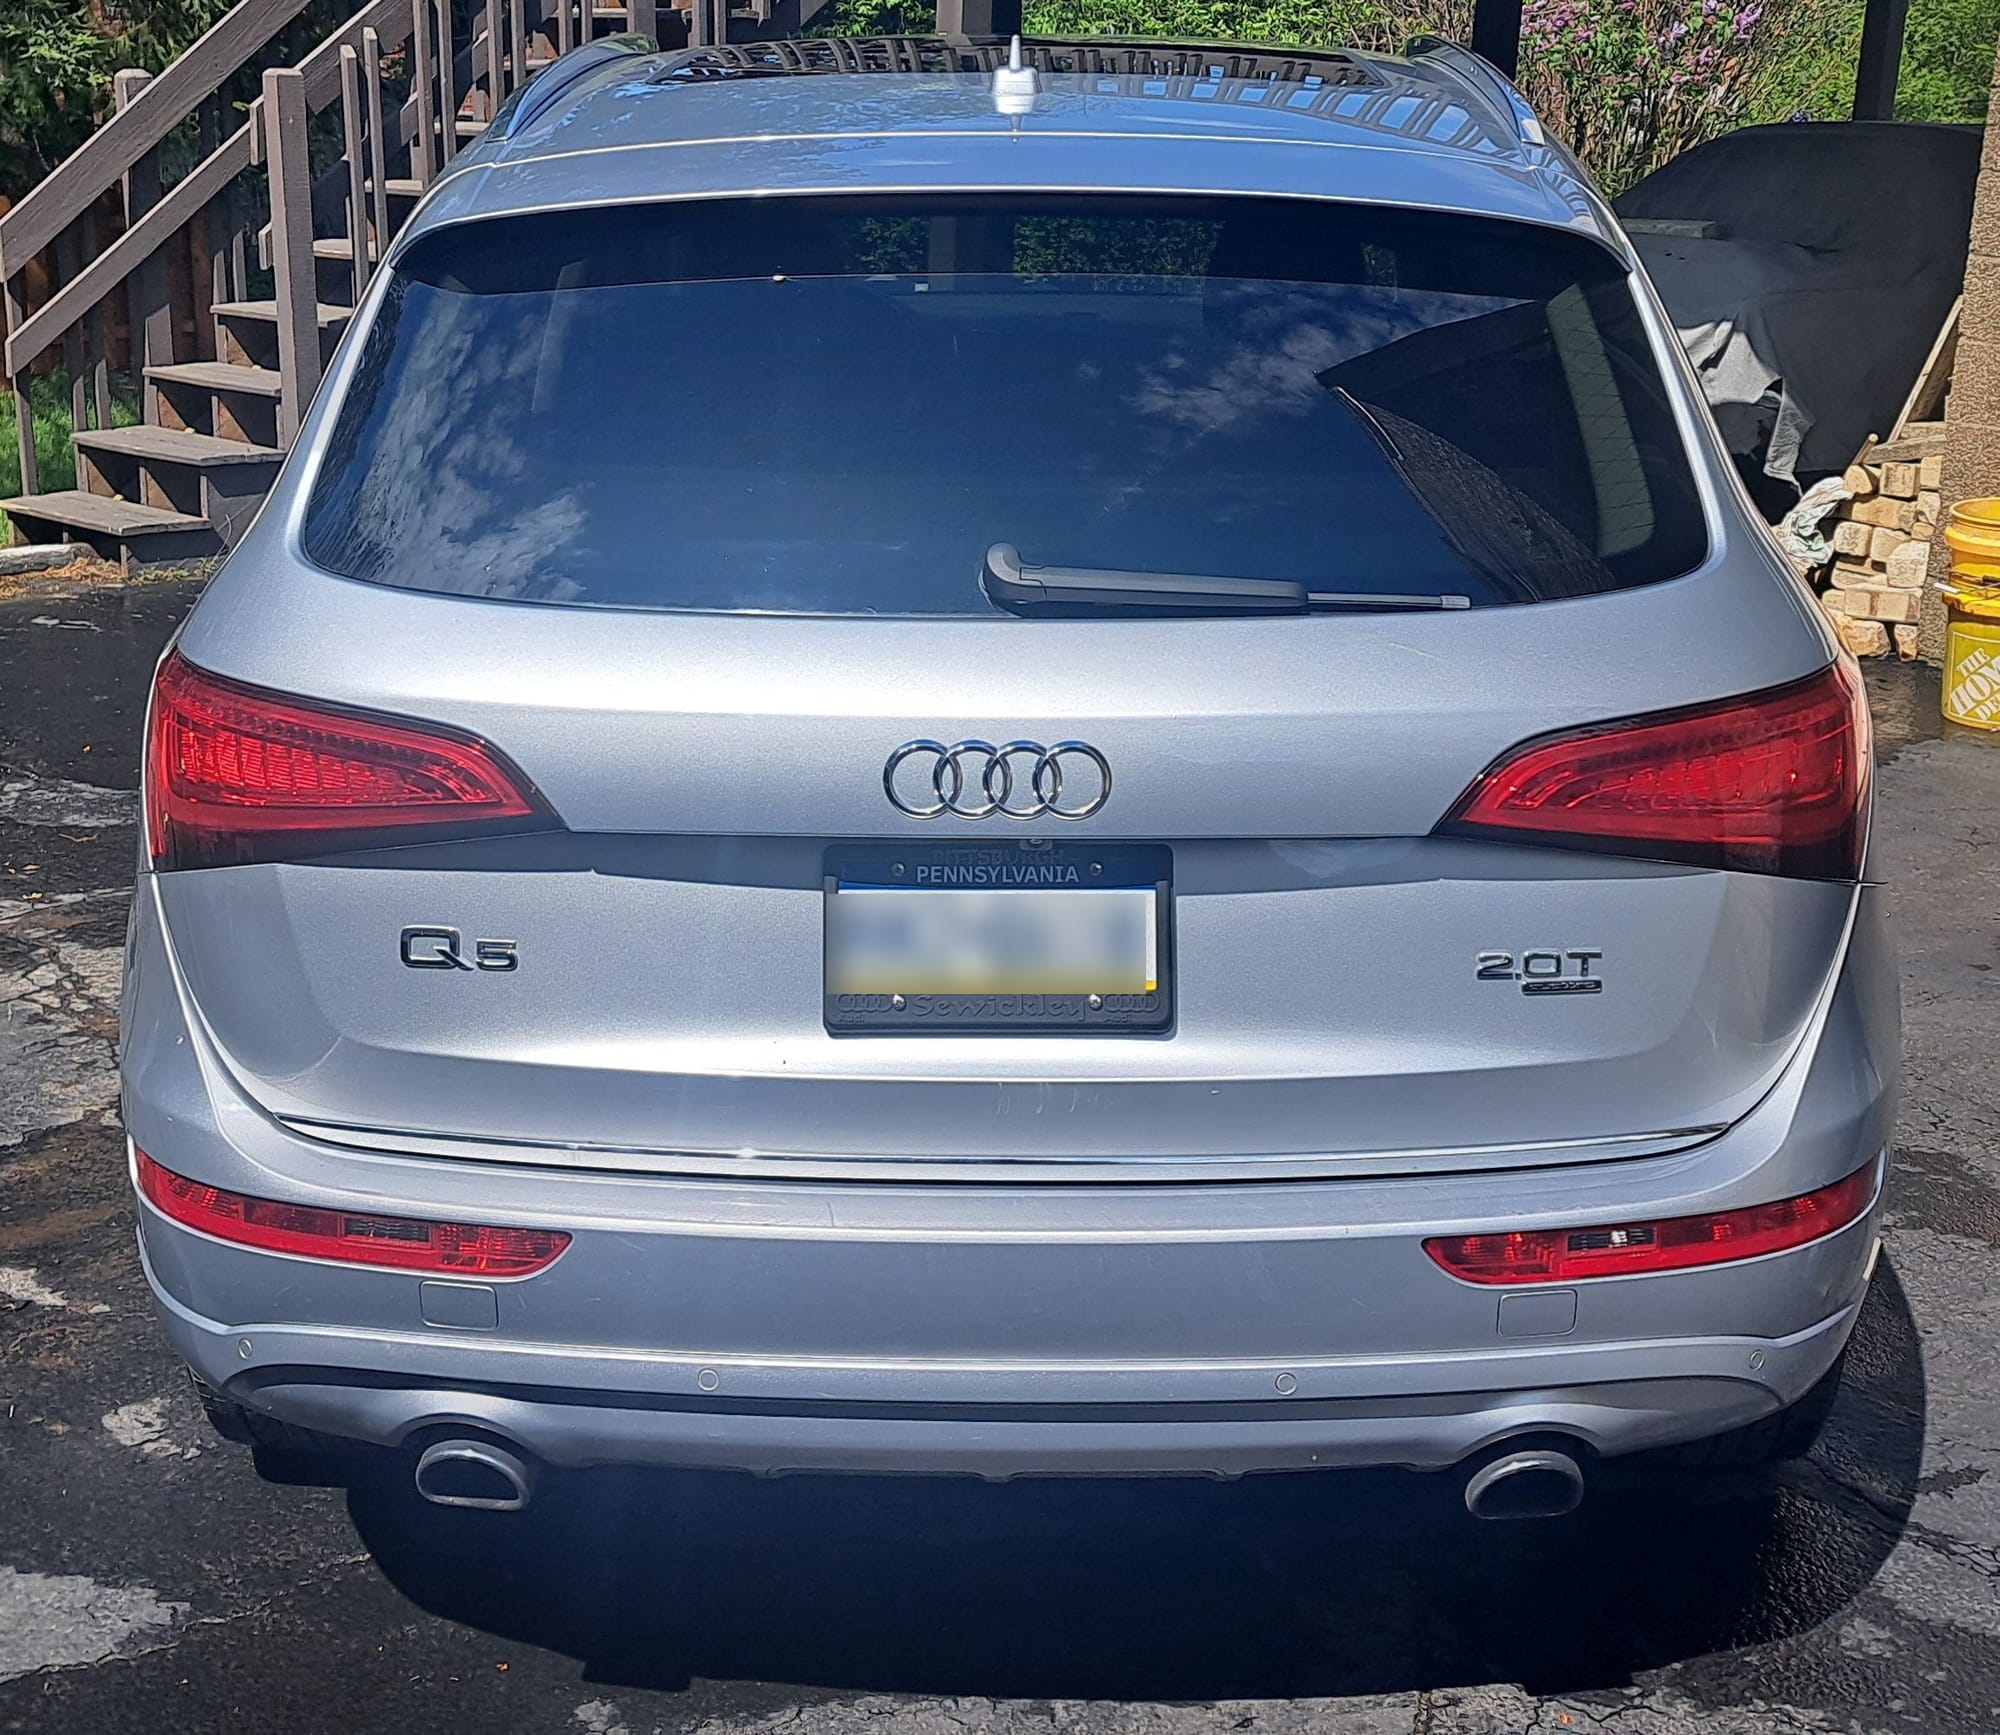 2015 Audi Q5 - Great price on a 2015 Audi Q5 2.0t Premium Plus - Used - VIN 2015 Audi Q5 2.0t - 156,000 Miles - 4 cyl - AWD - Automatic - SUV - Silver - Pittsburgh, PA 15216, United States